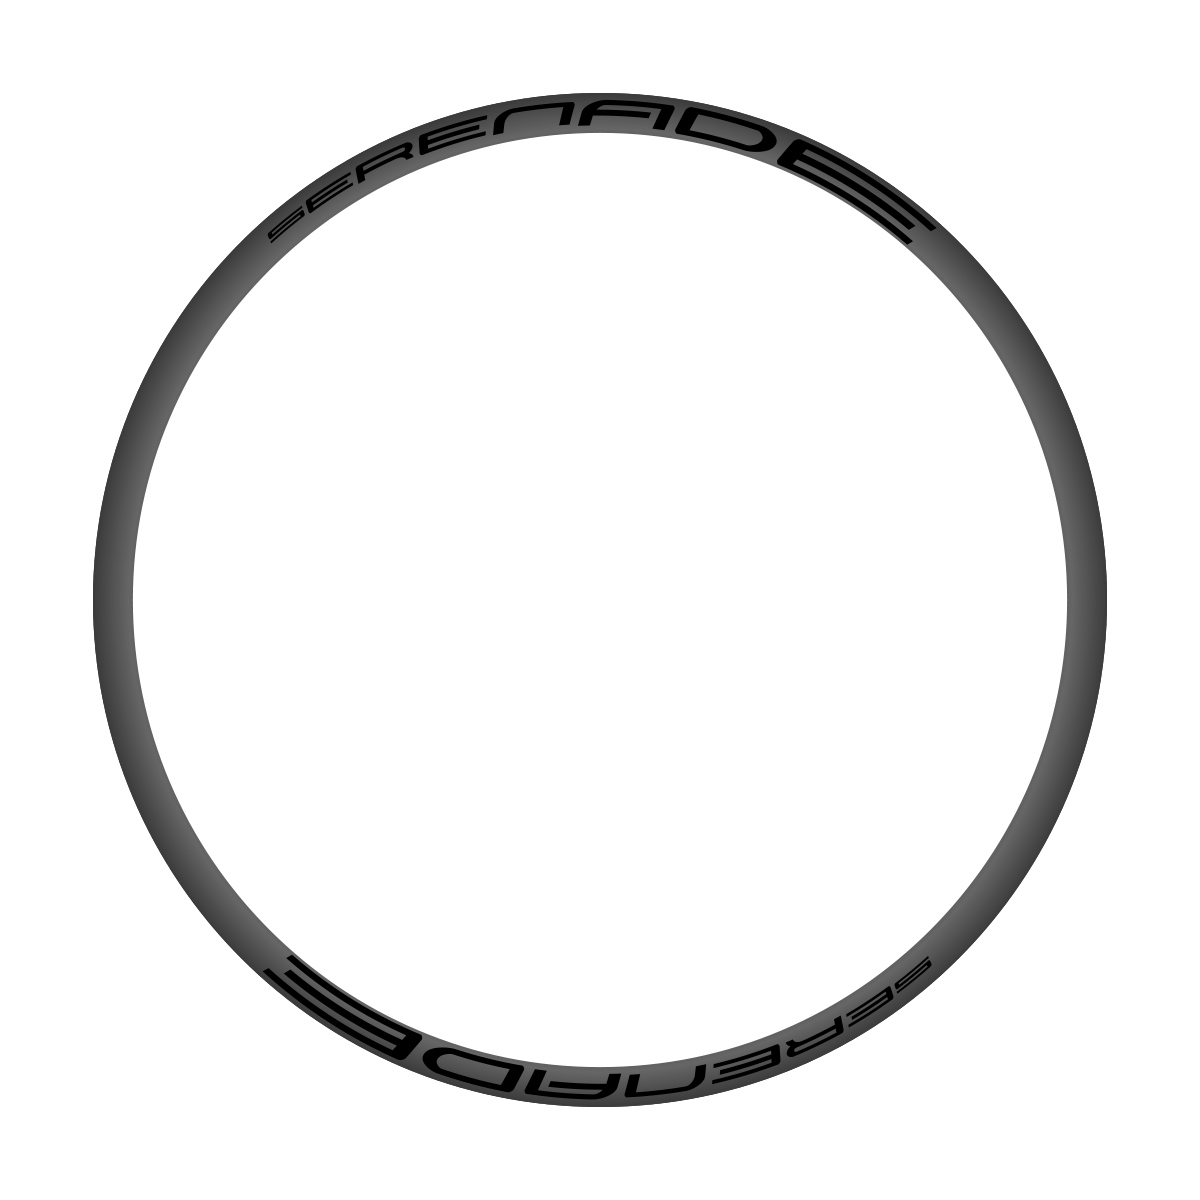 24mm wide with 24mm depth carbon 29er mountain bike rims TMC924 cycle wheeling 24mm chinese carbon mtb bike rims 29 inch clincher